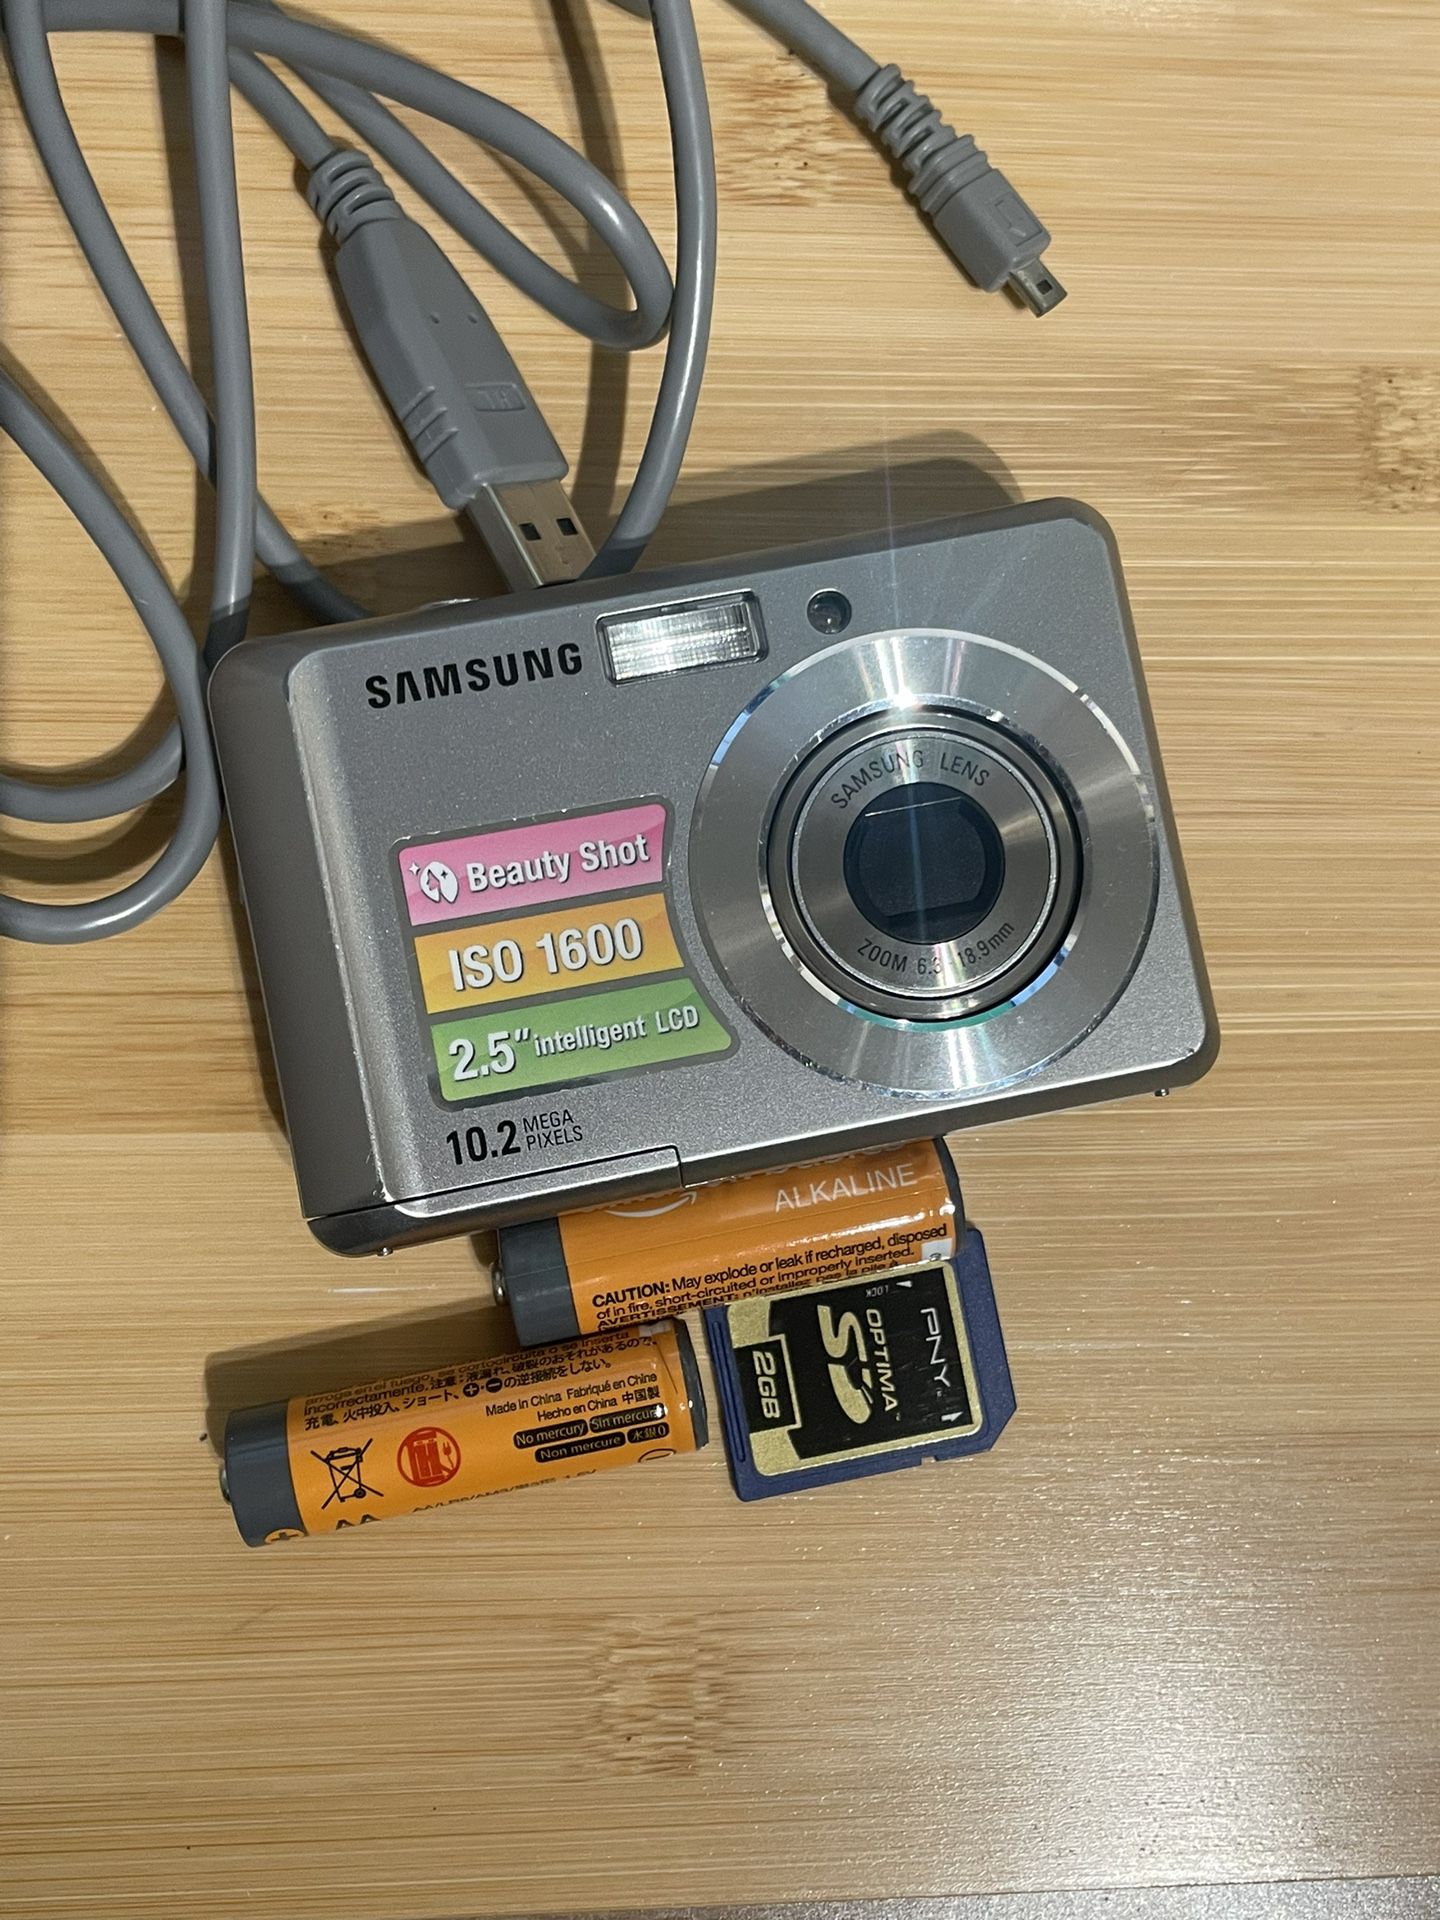 Samsung SL30 digital camera 10.2 Mp Tested Works  Flash zoom video shutter all working. Batteries, memory card and USB cord included